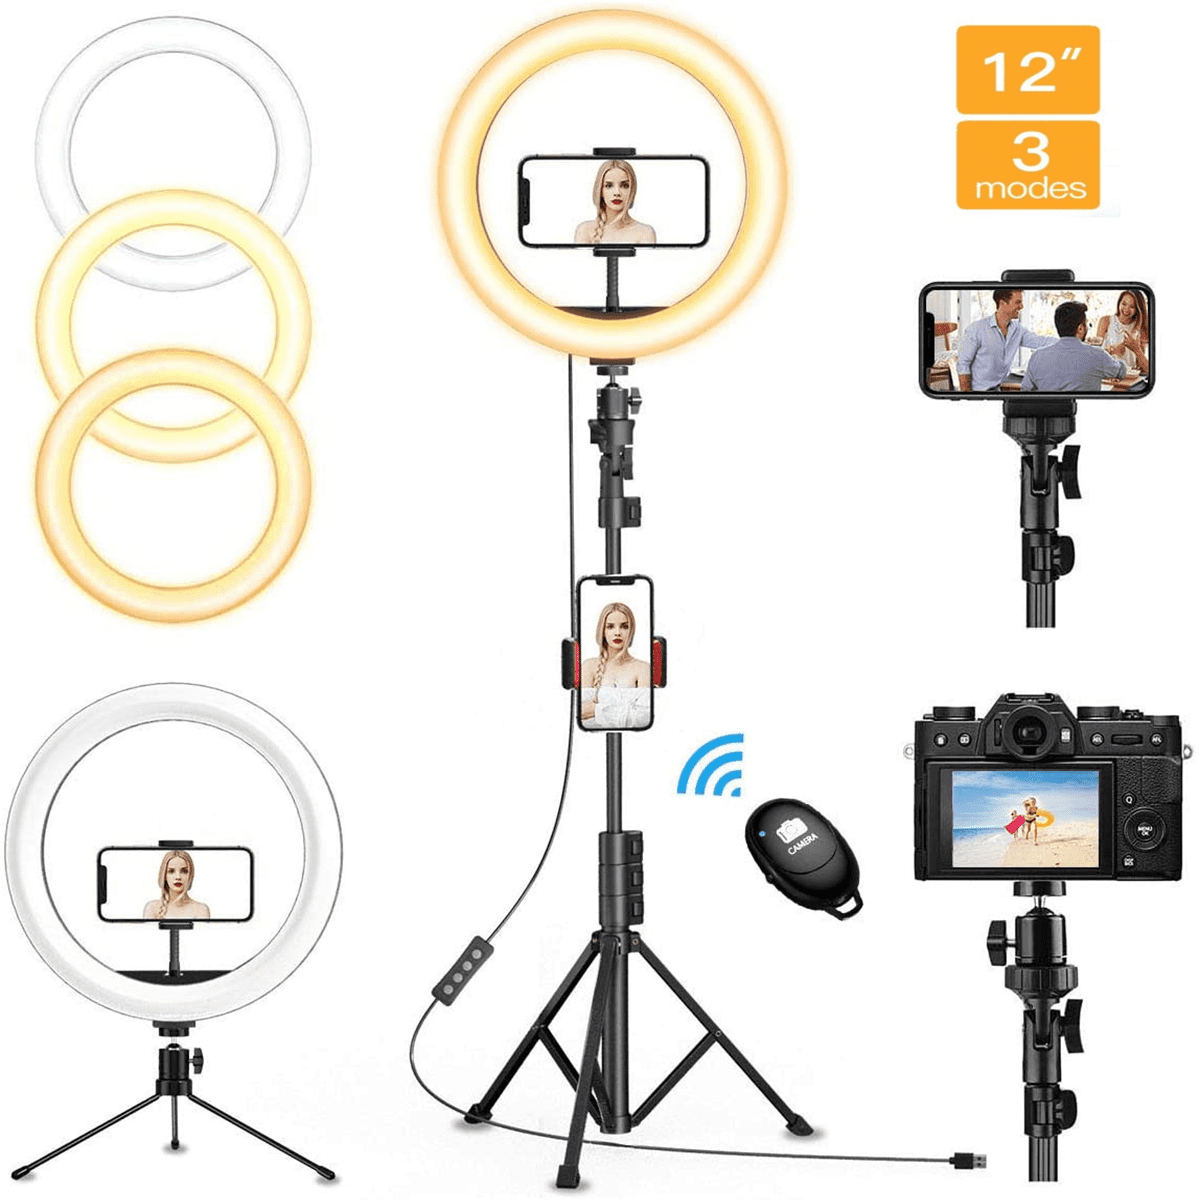 Ring Light Ultra Slim LED with Light Stand Lighting Kit for Makeup Live Stream Camera Smartphone Video Shooting Photography with Phone Holder